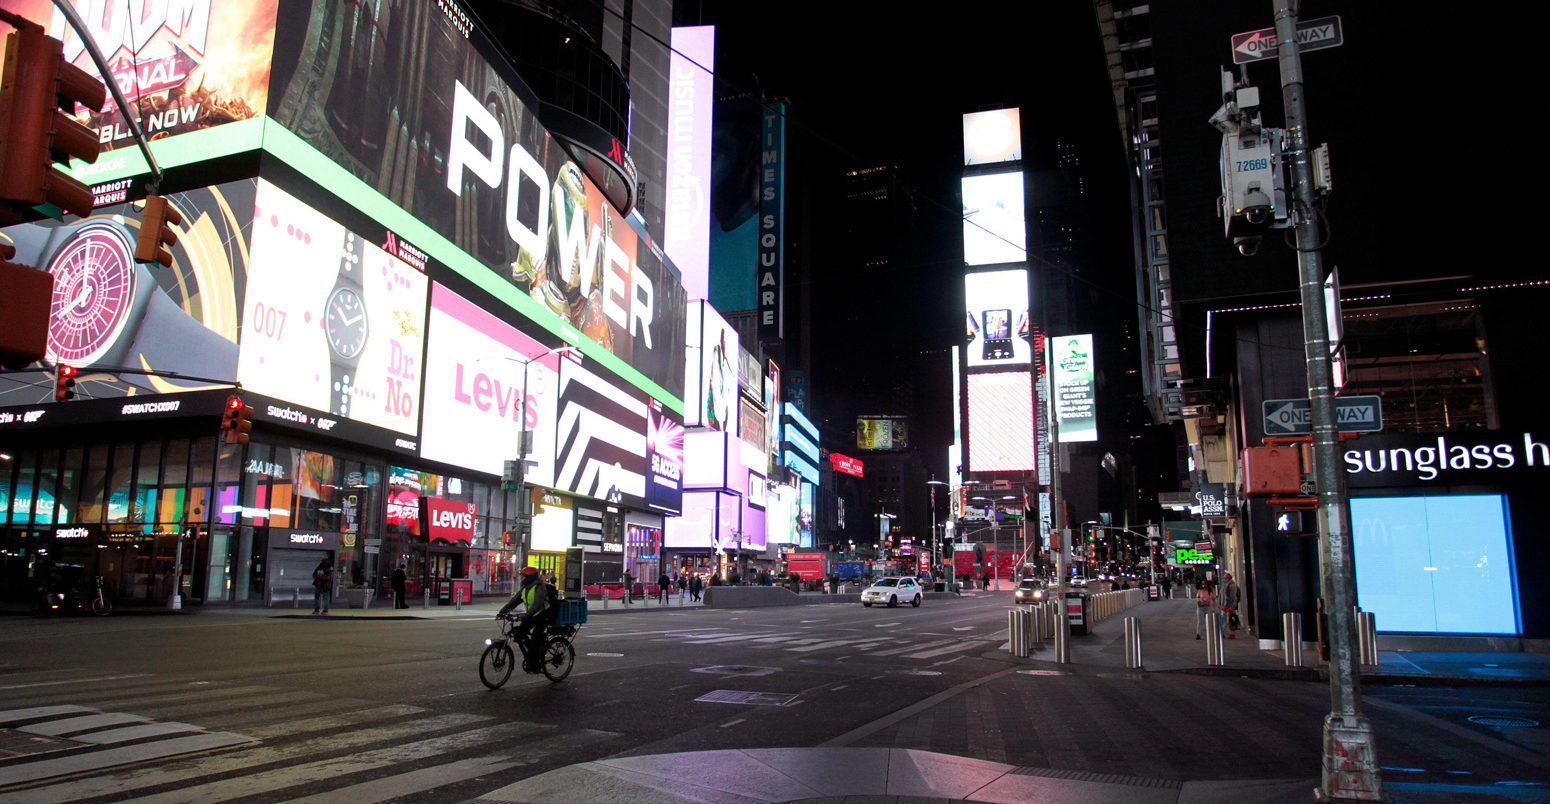 A largely empty Times Square during the Coronavirus pandemic, New York City. 21 March 2020. Credit: Adam Stoltman / Alamy Stock Photo